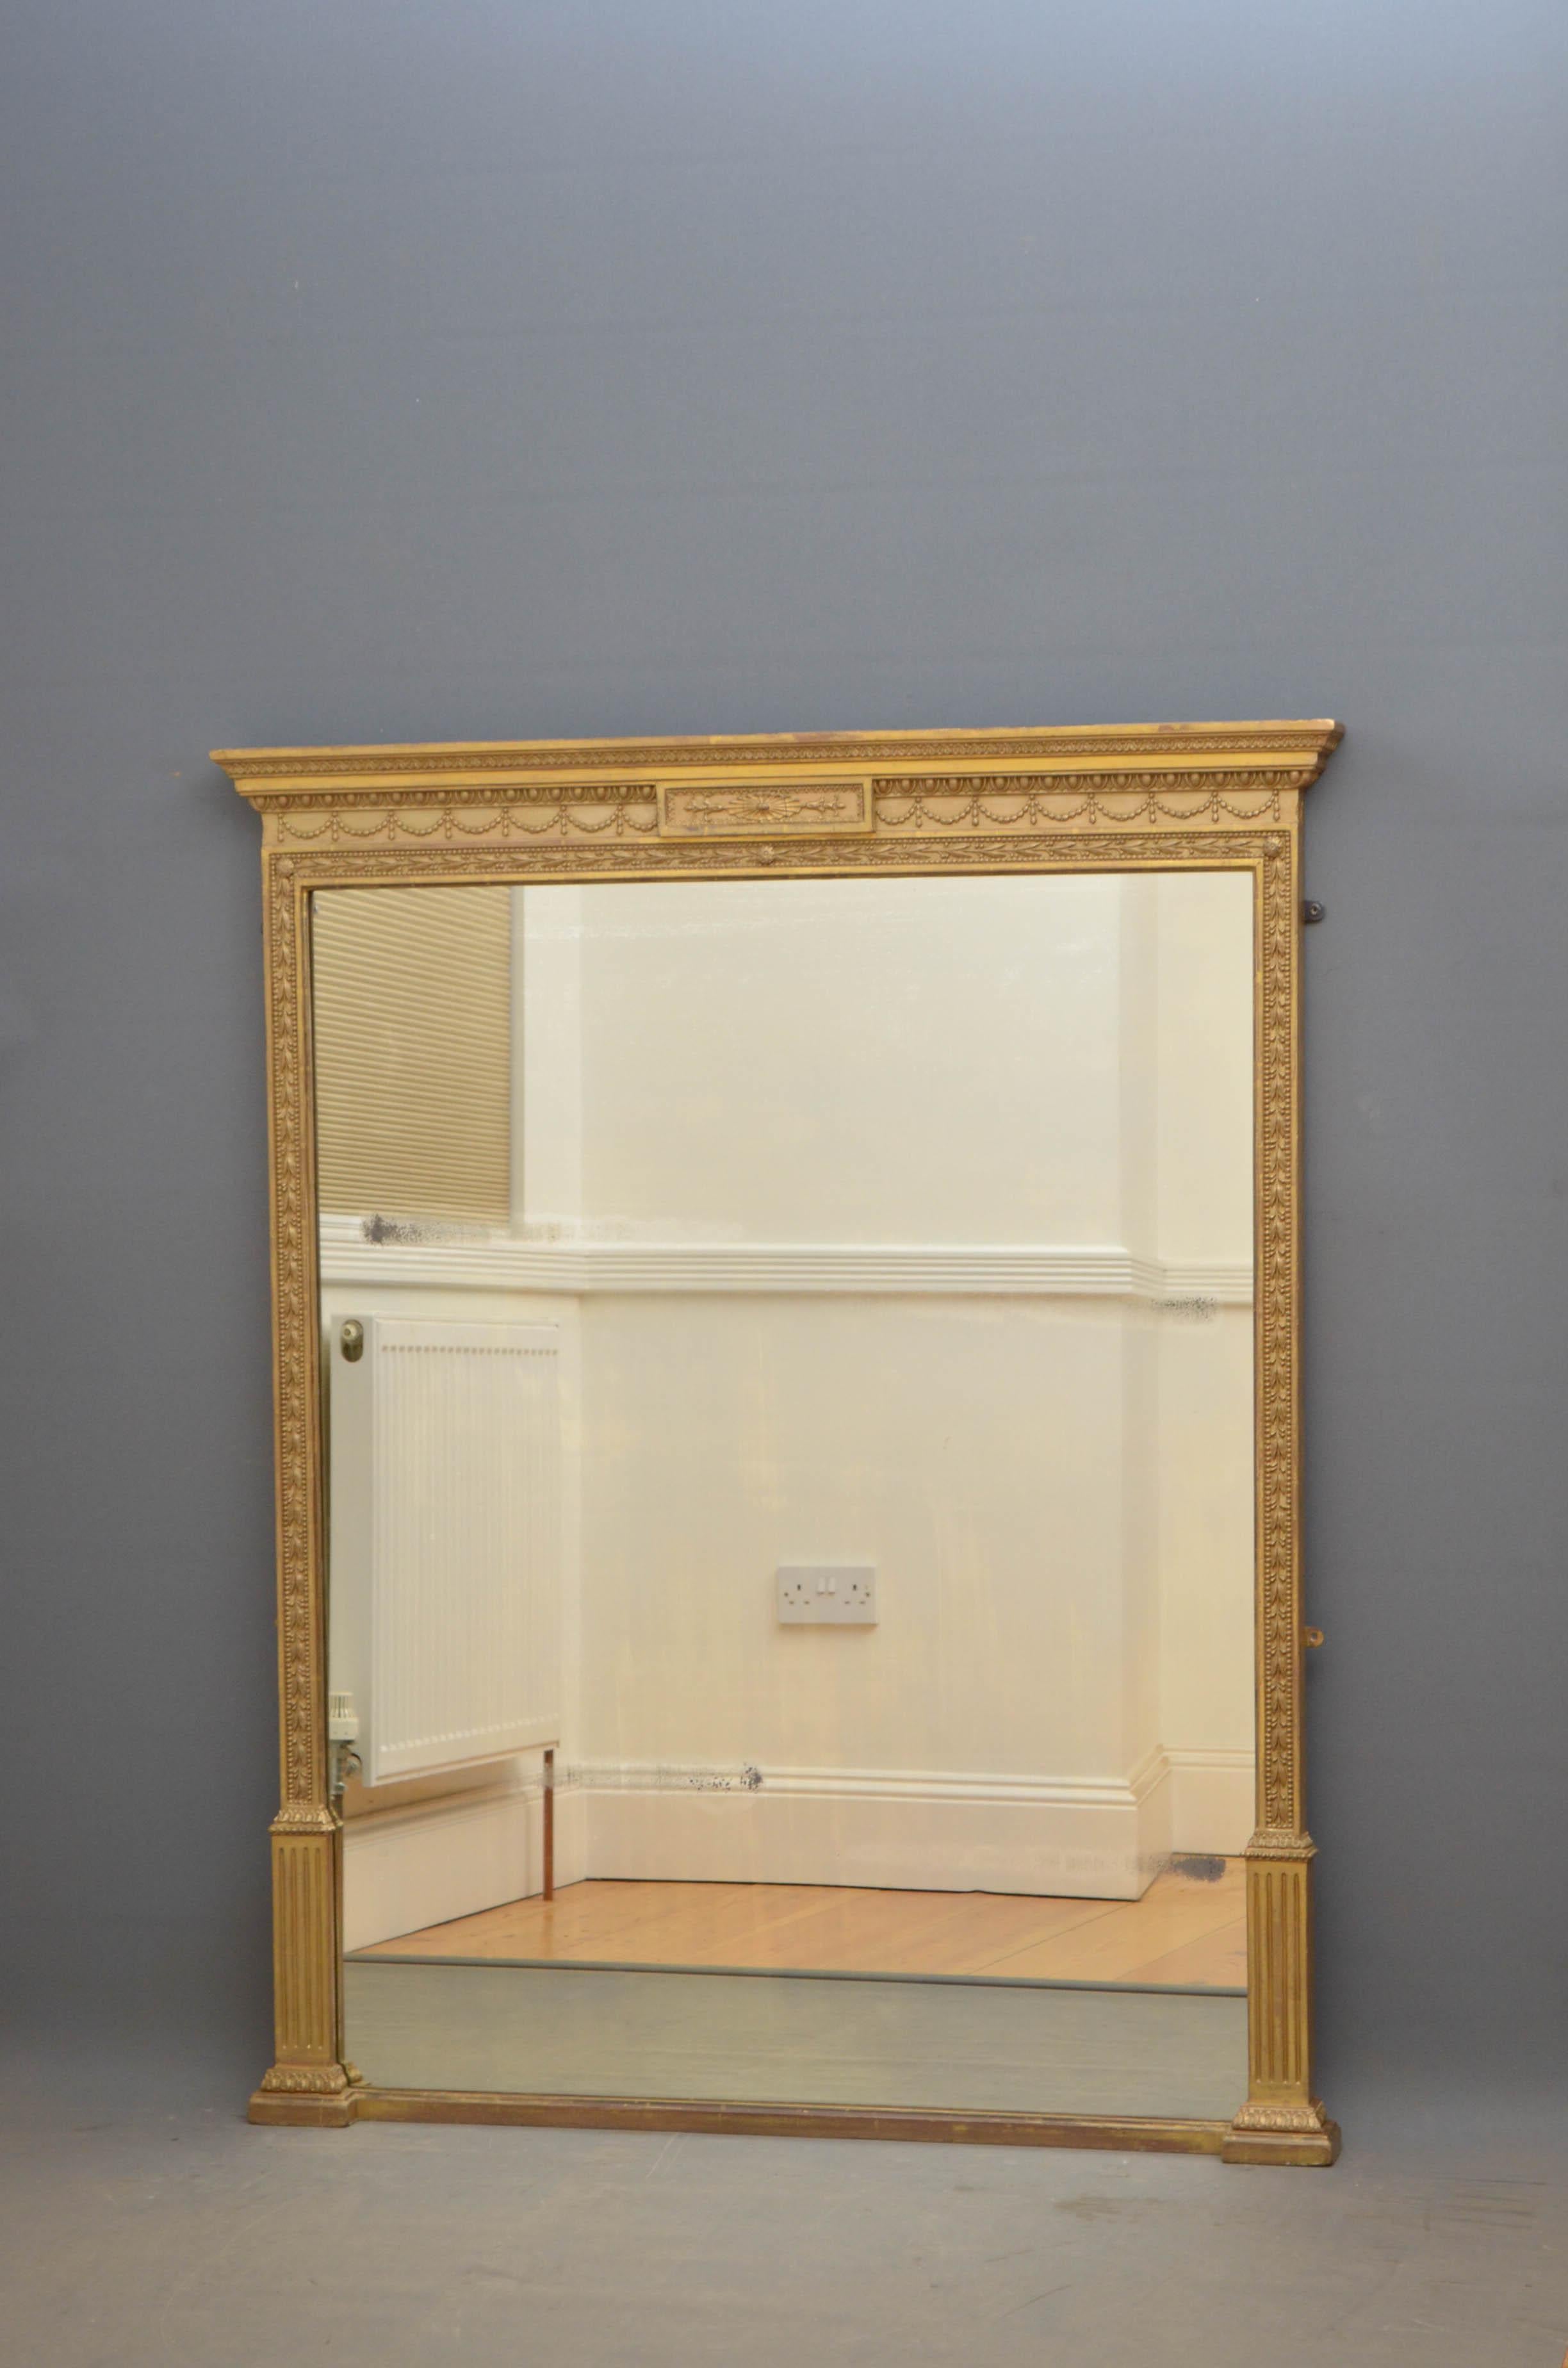 Sn4722 Victorian gilt wall mirror, having original mirror plate with foxing in beautifully decorated giltwood frame. 
This antique mirror retains its original glass, gilt and panelled backboards, all in home ready condition. c1880 
H54